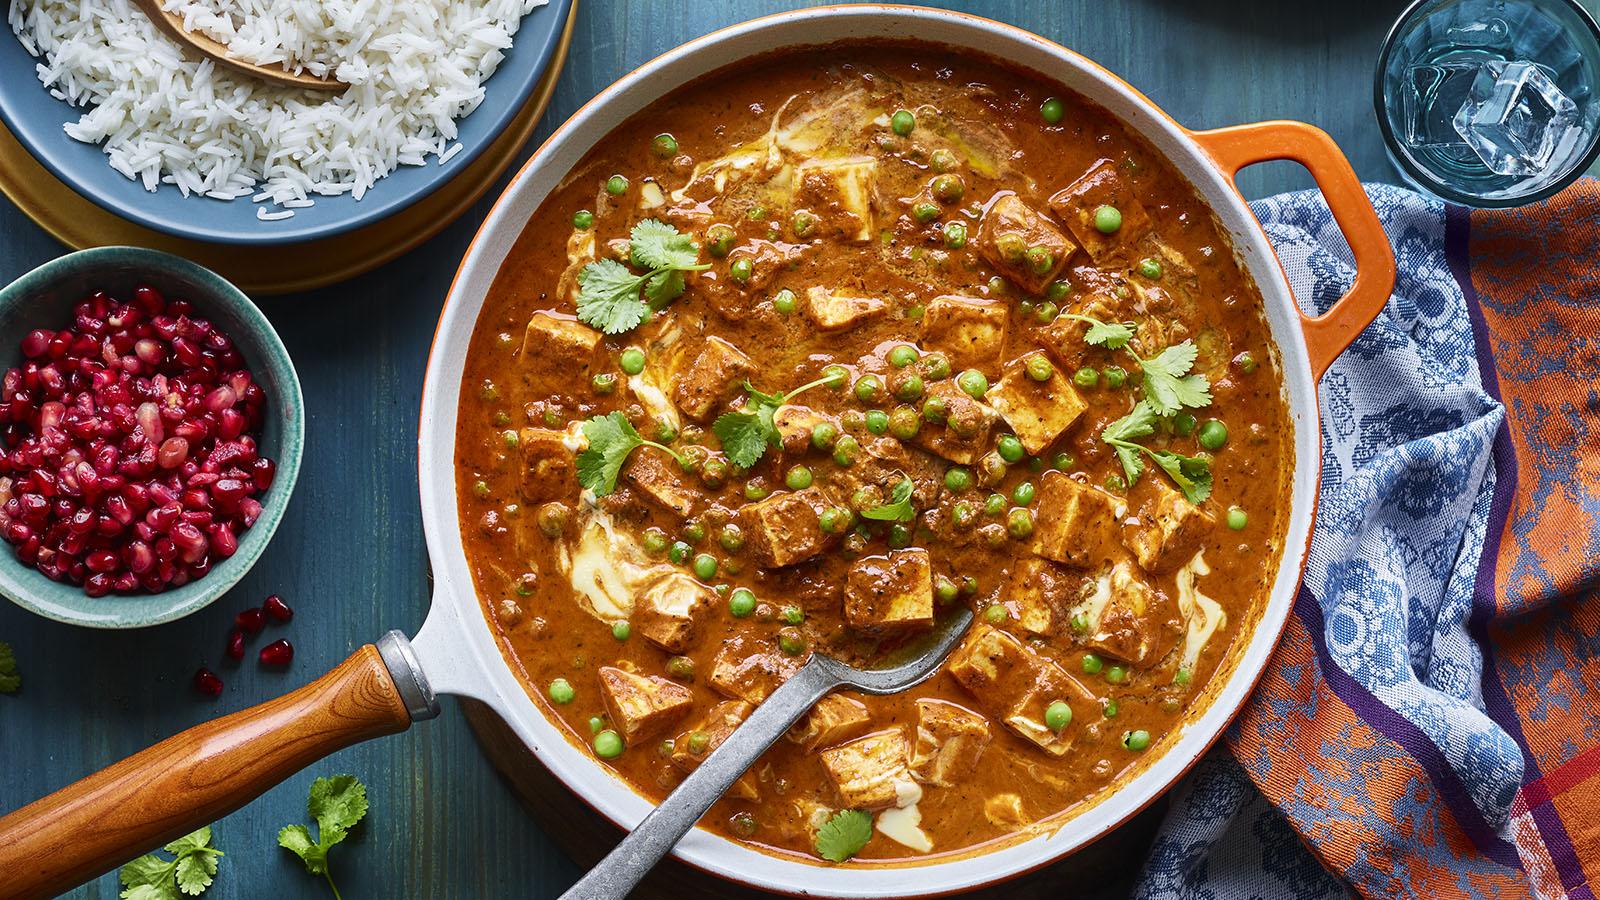 Vegetable curry recipes - BBC Food